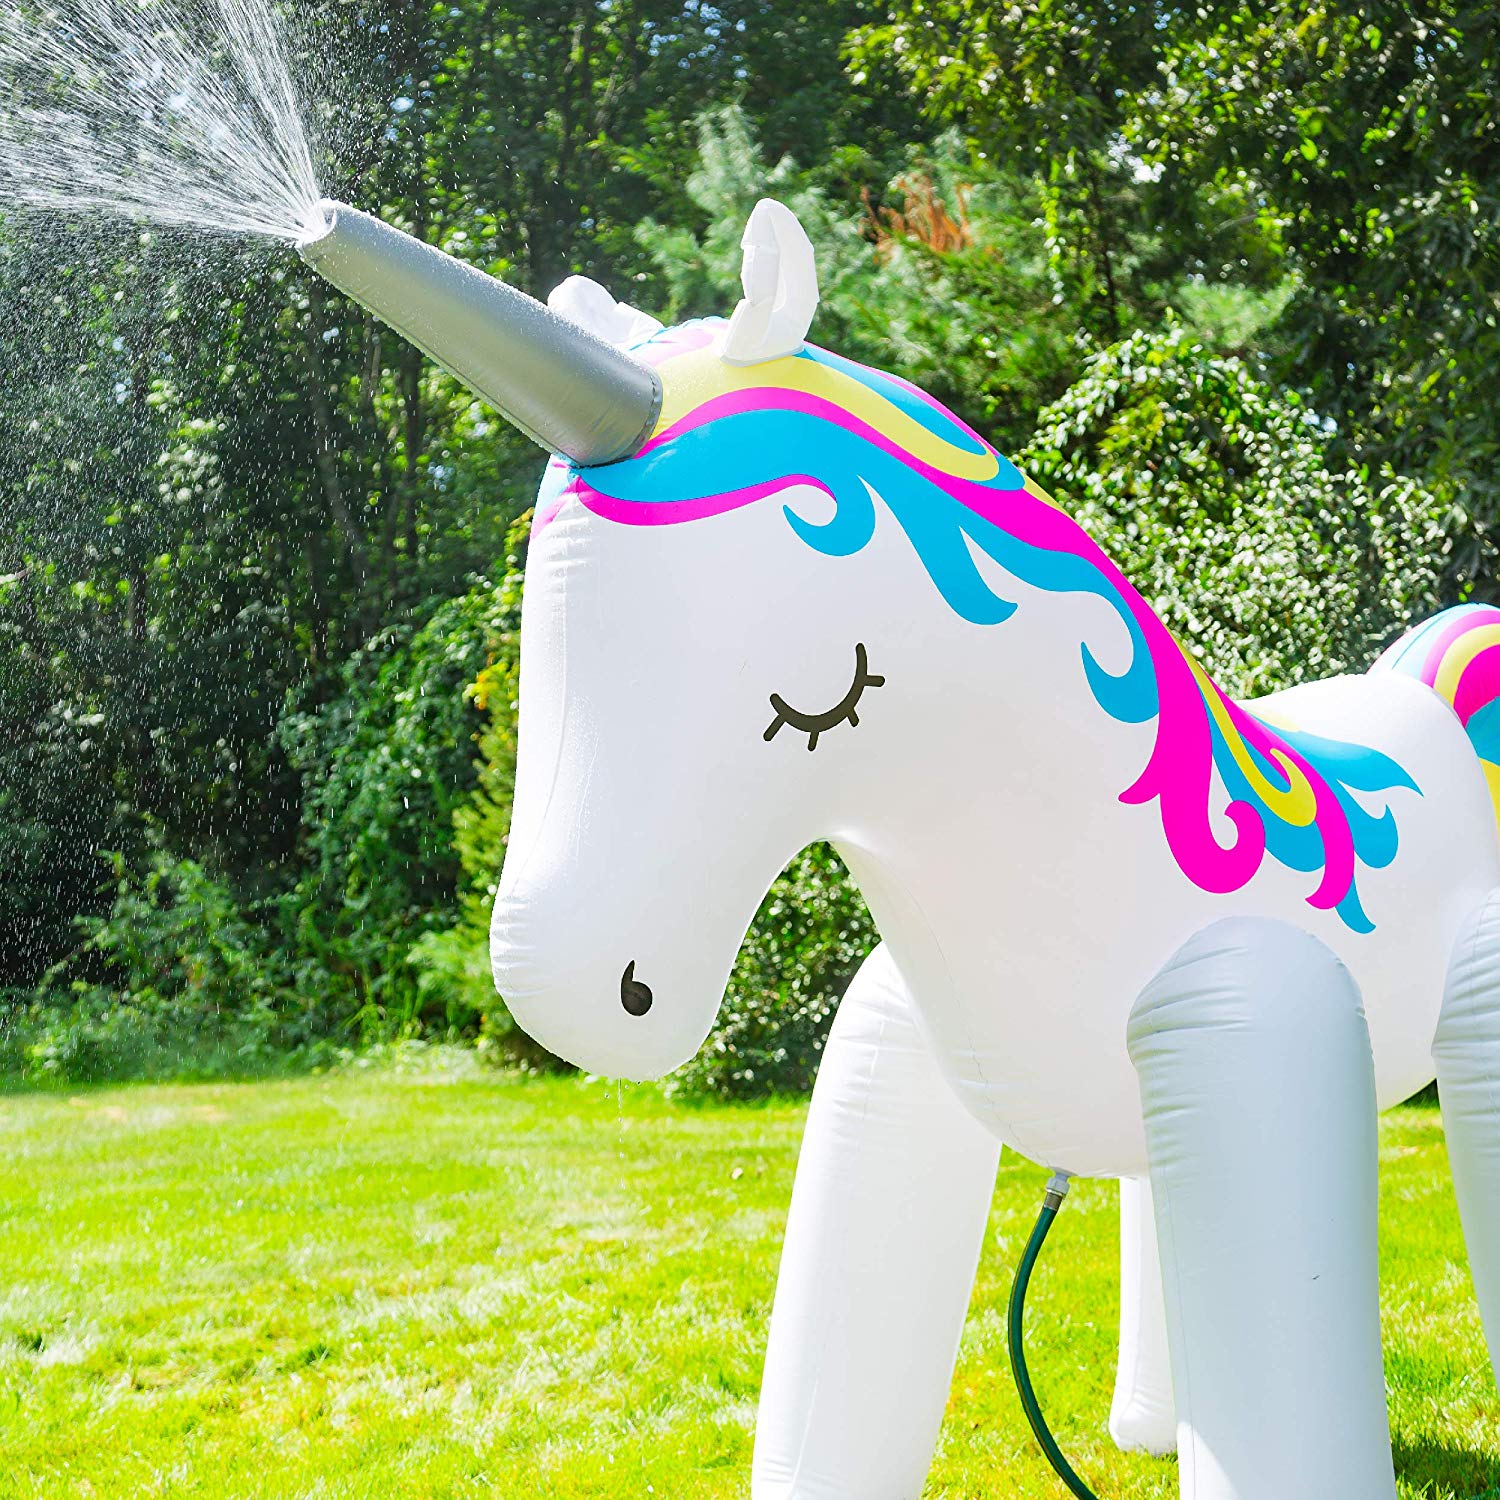 This Giant Inflatable Unicorn Sprinkler Will Take Your Summer BBQs To The Next Level